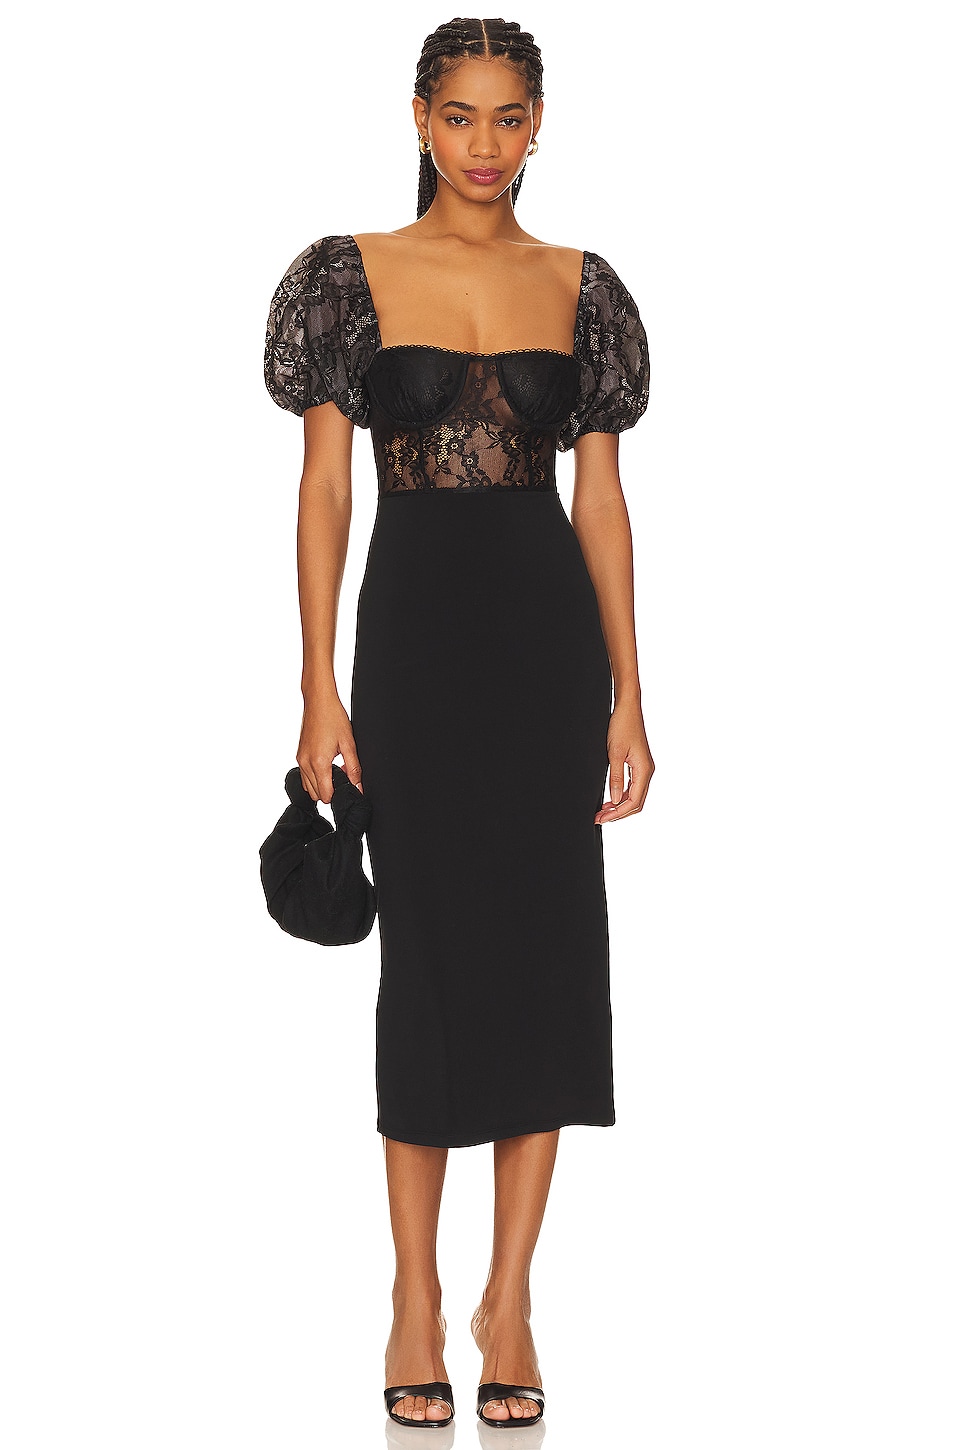 WeWoreWhat Underwire Corset Midi Lace Dress in Black